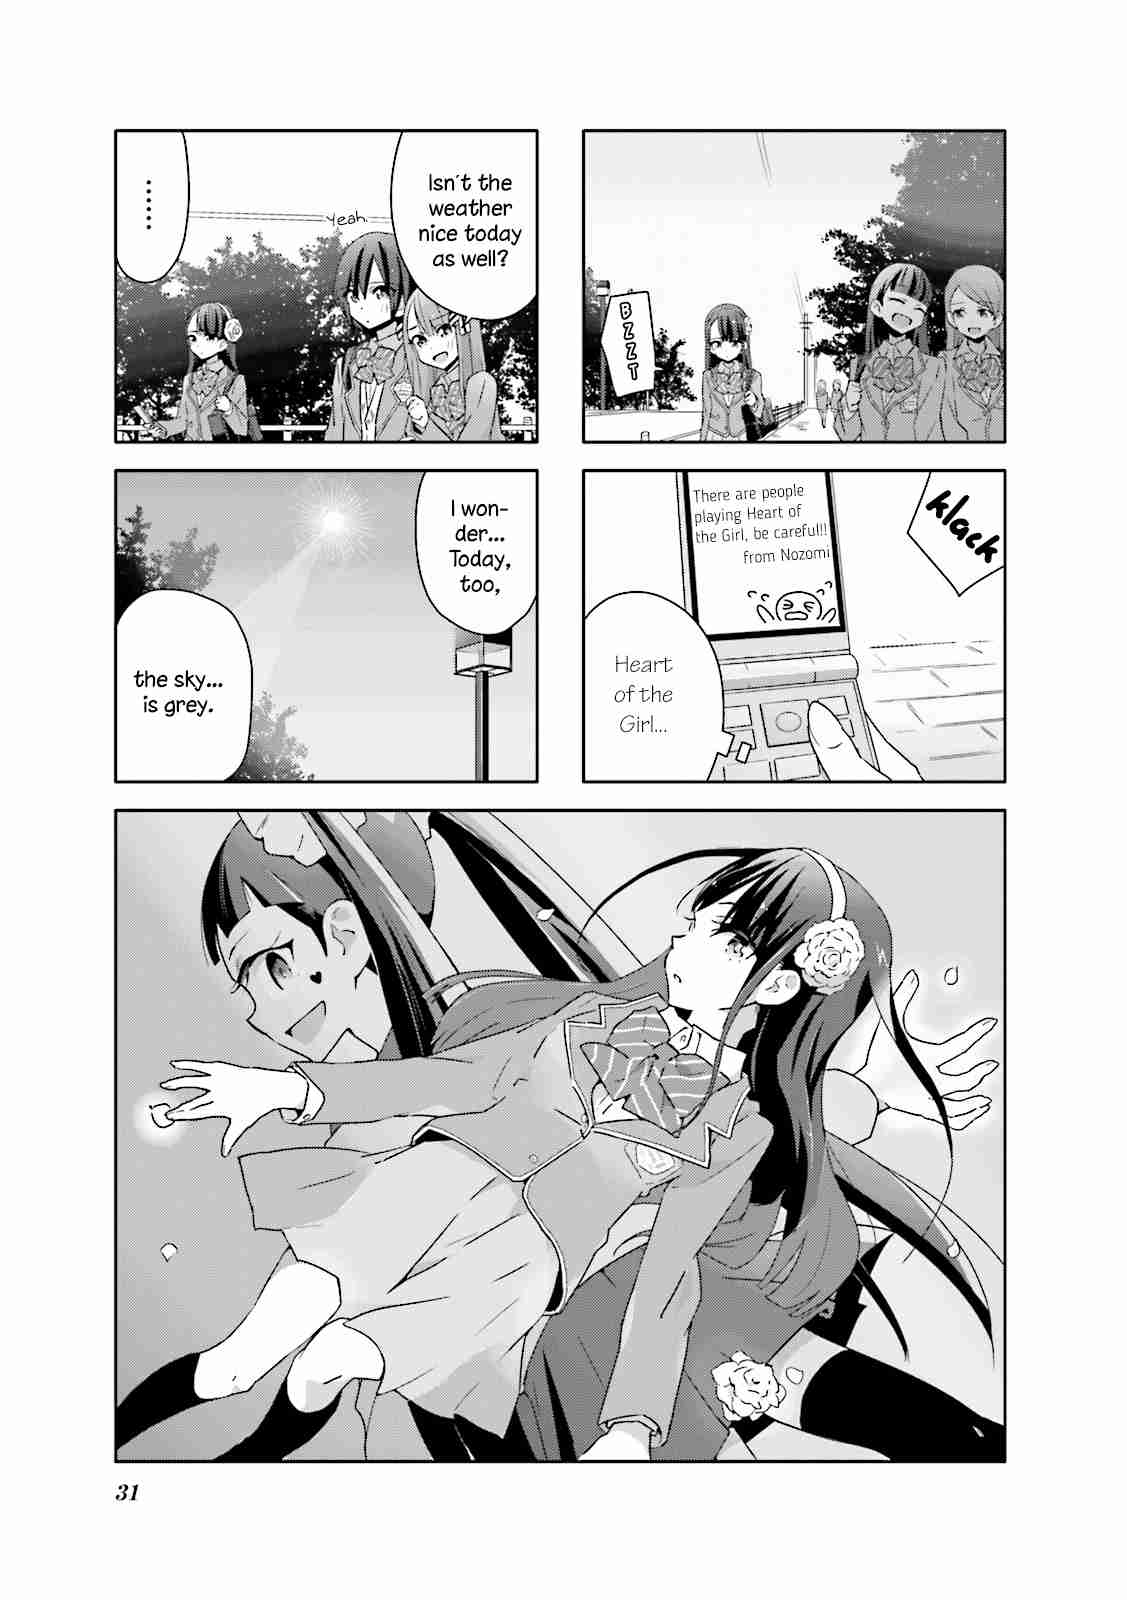 Heart of the Girl Vol. 1 Ch. 3